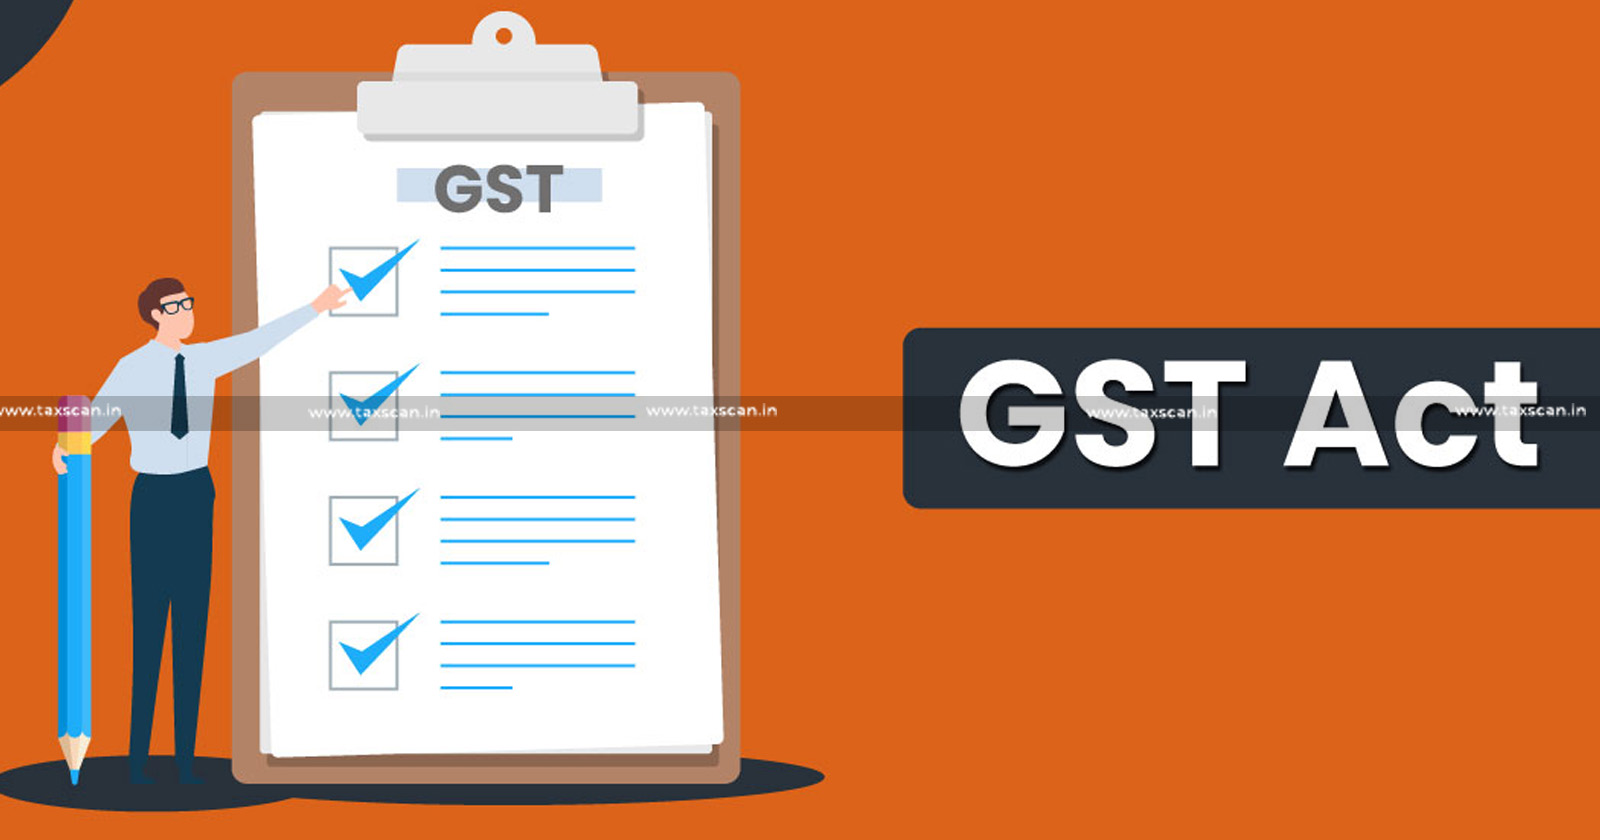 Andhra Pradesh HC Invalidates Detention of Goods under Transit Merely on Suspicion regarding Seller Credentials - Orders Release of Goods as Due Procedure under GST Act Not Followed - TAXSCAN